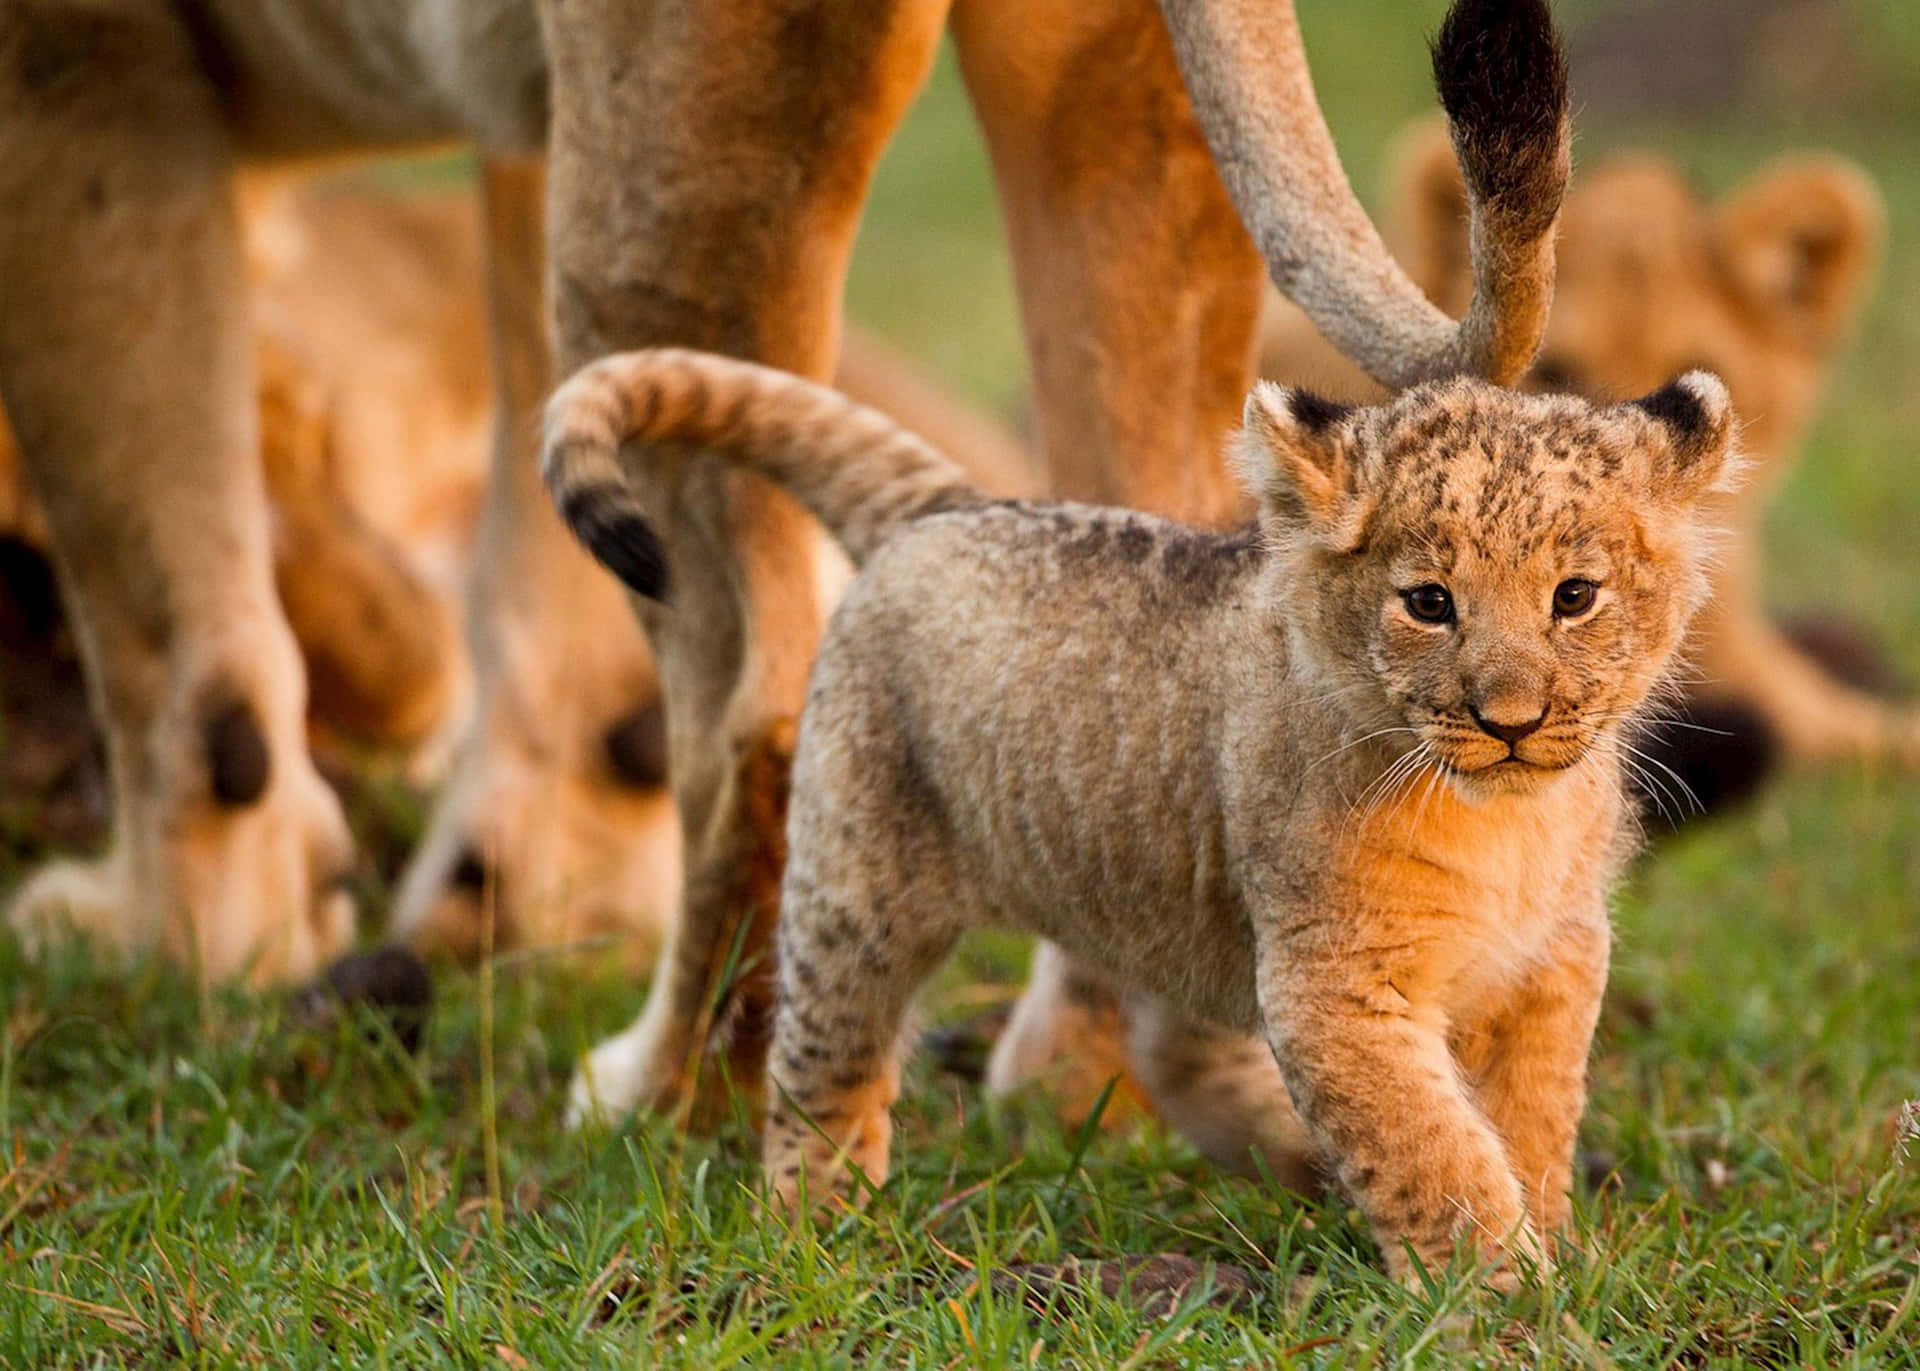 Adorable Lion Cub Sitting in the Wild